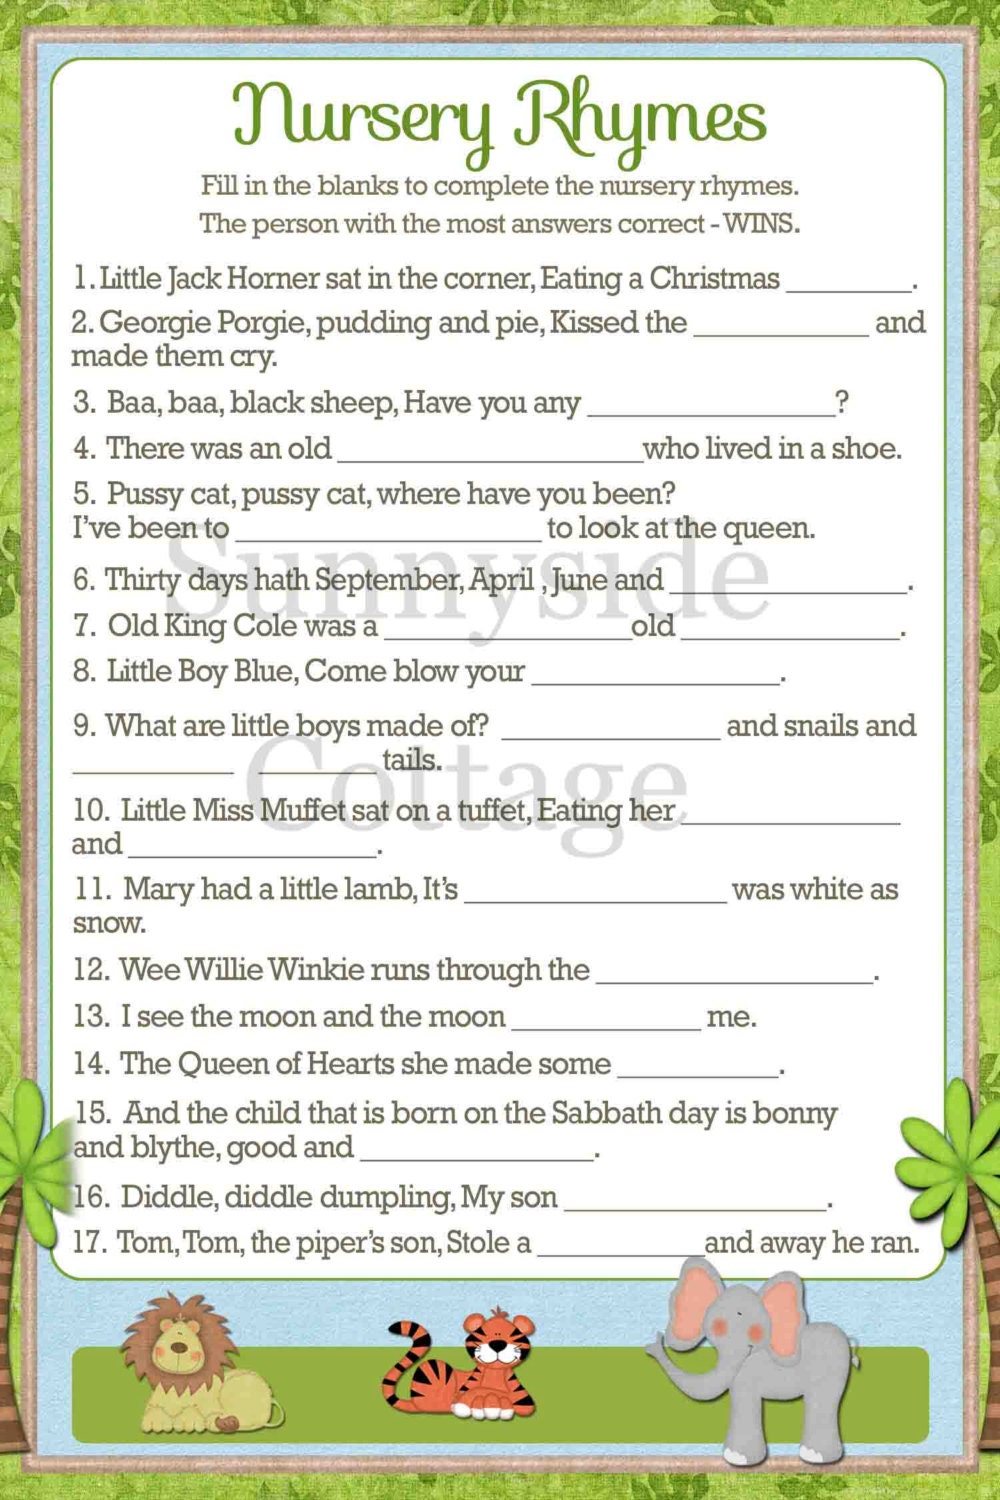 name-that-nursery-rhyme-game-for-baby-shower-the-best-baby-shower-ideas-while-he-was-napping